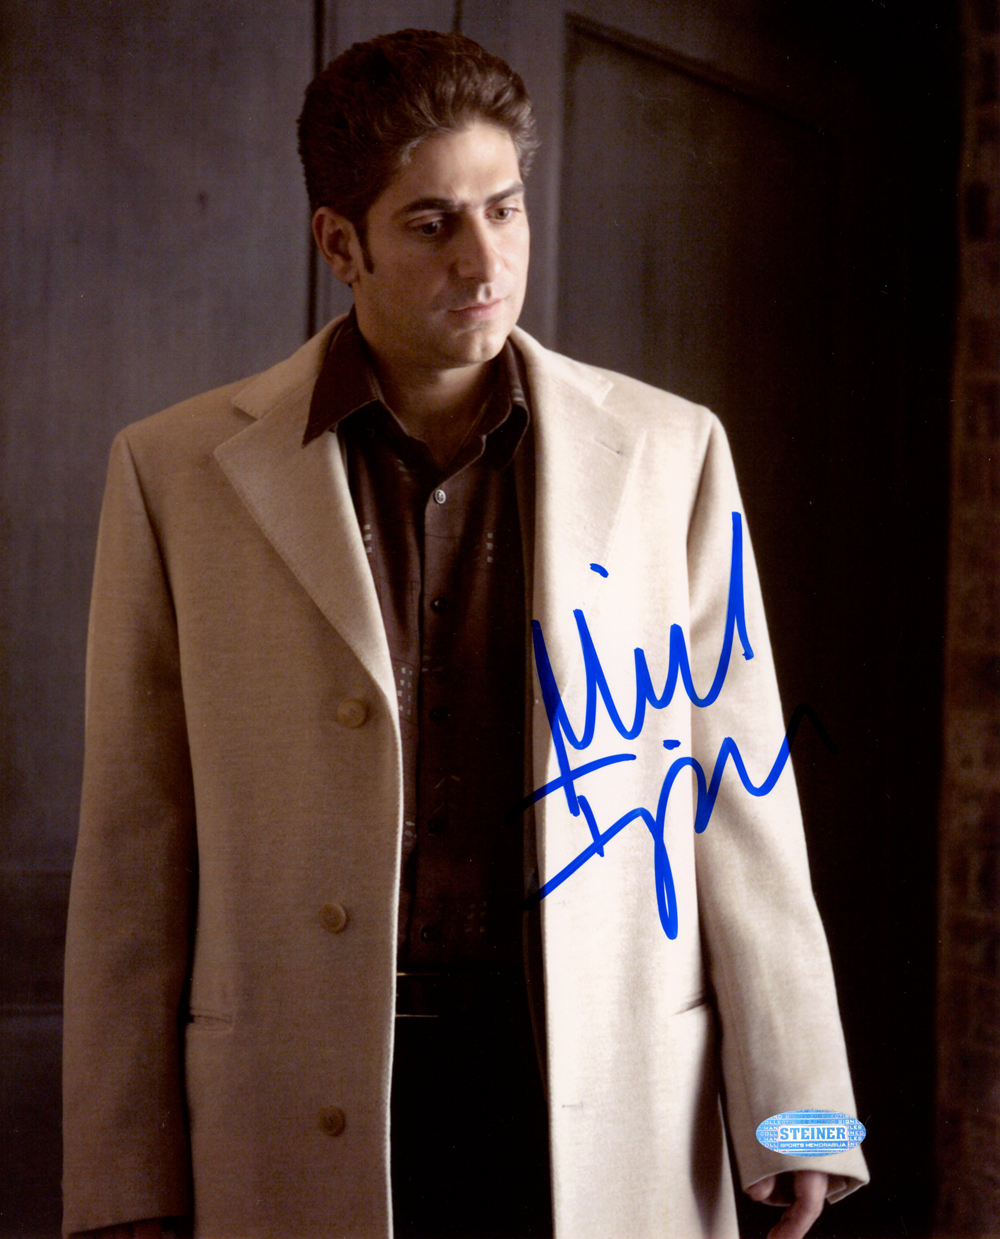 Michael Imperioli Autographed/Signed The Sopranos 8x10 Photo Steiner